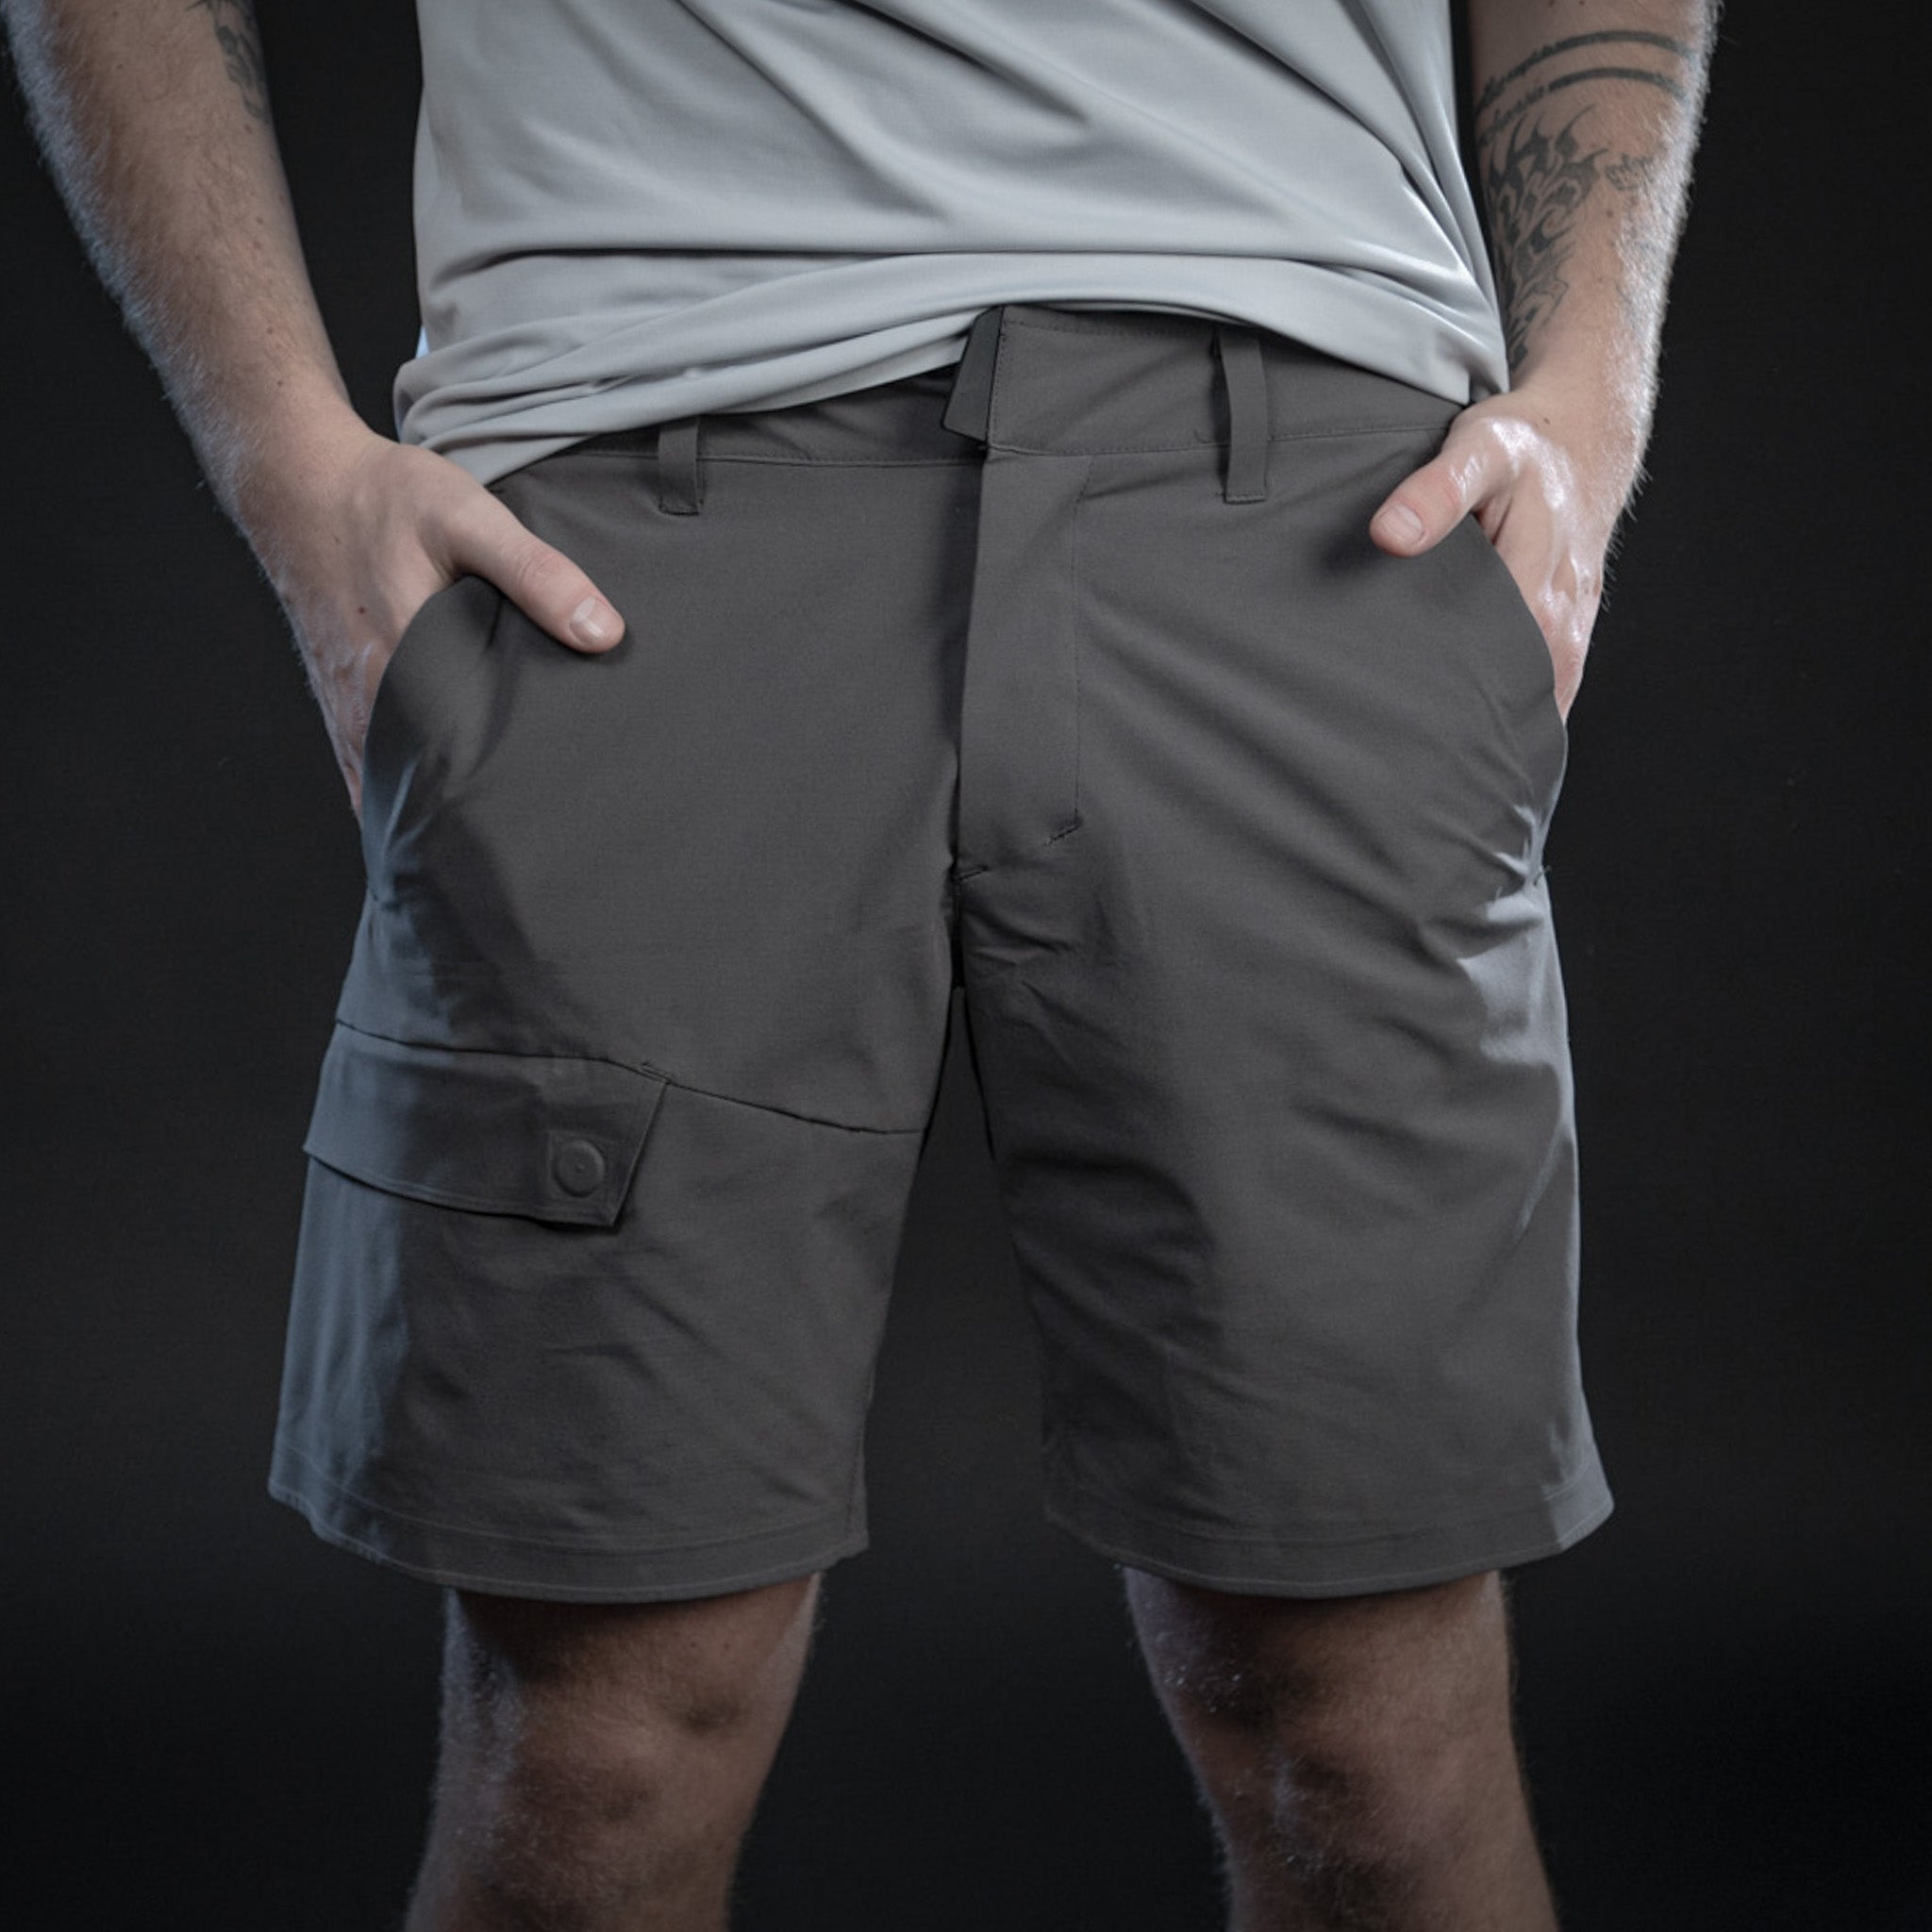 All Rounder Shorts / Everyday Performance Series